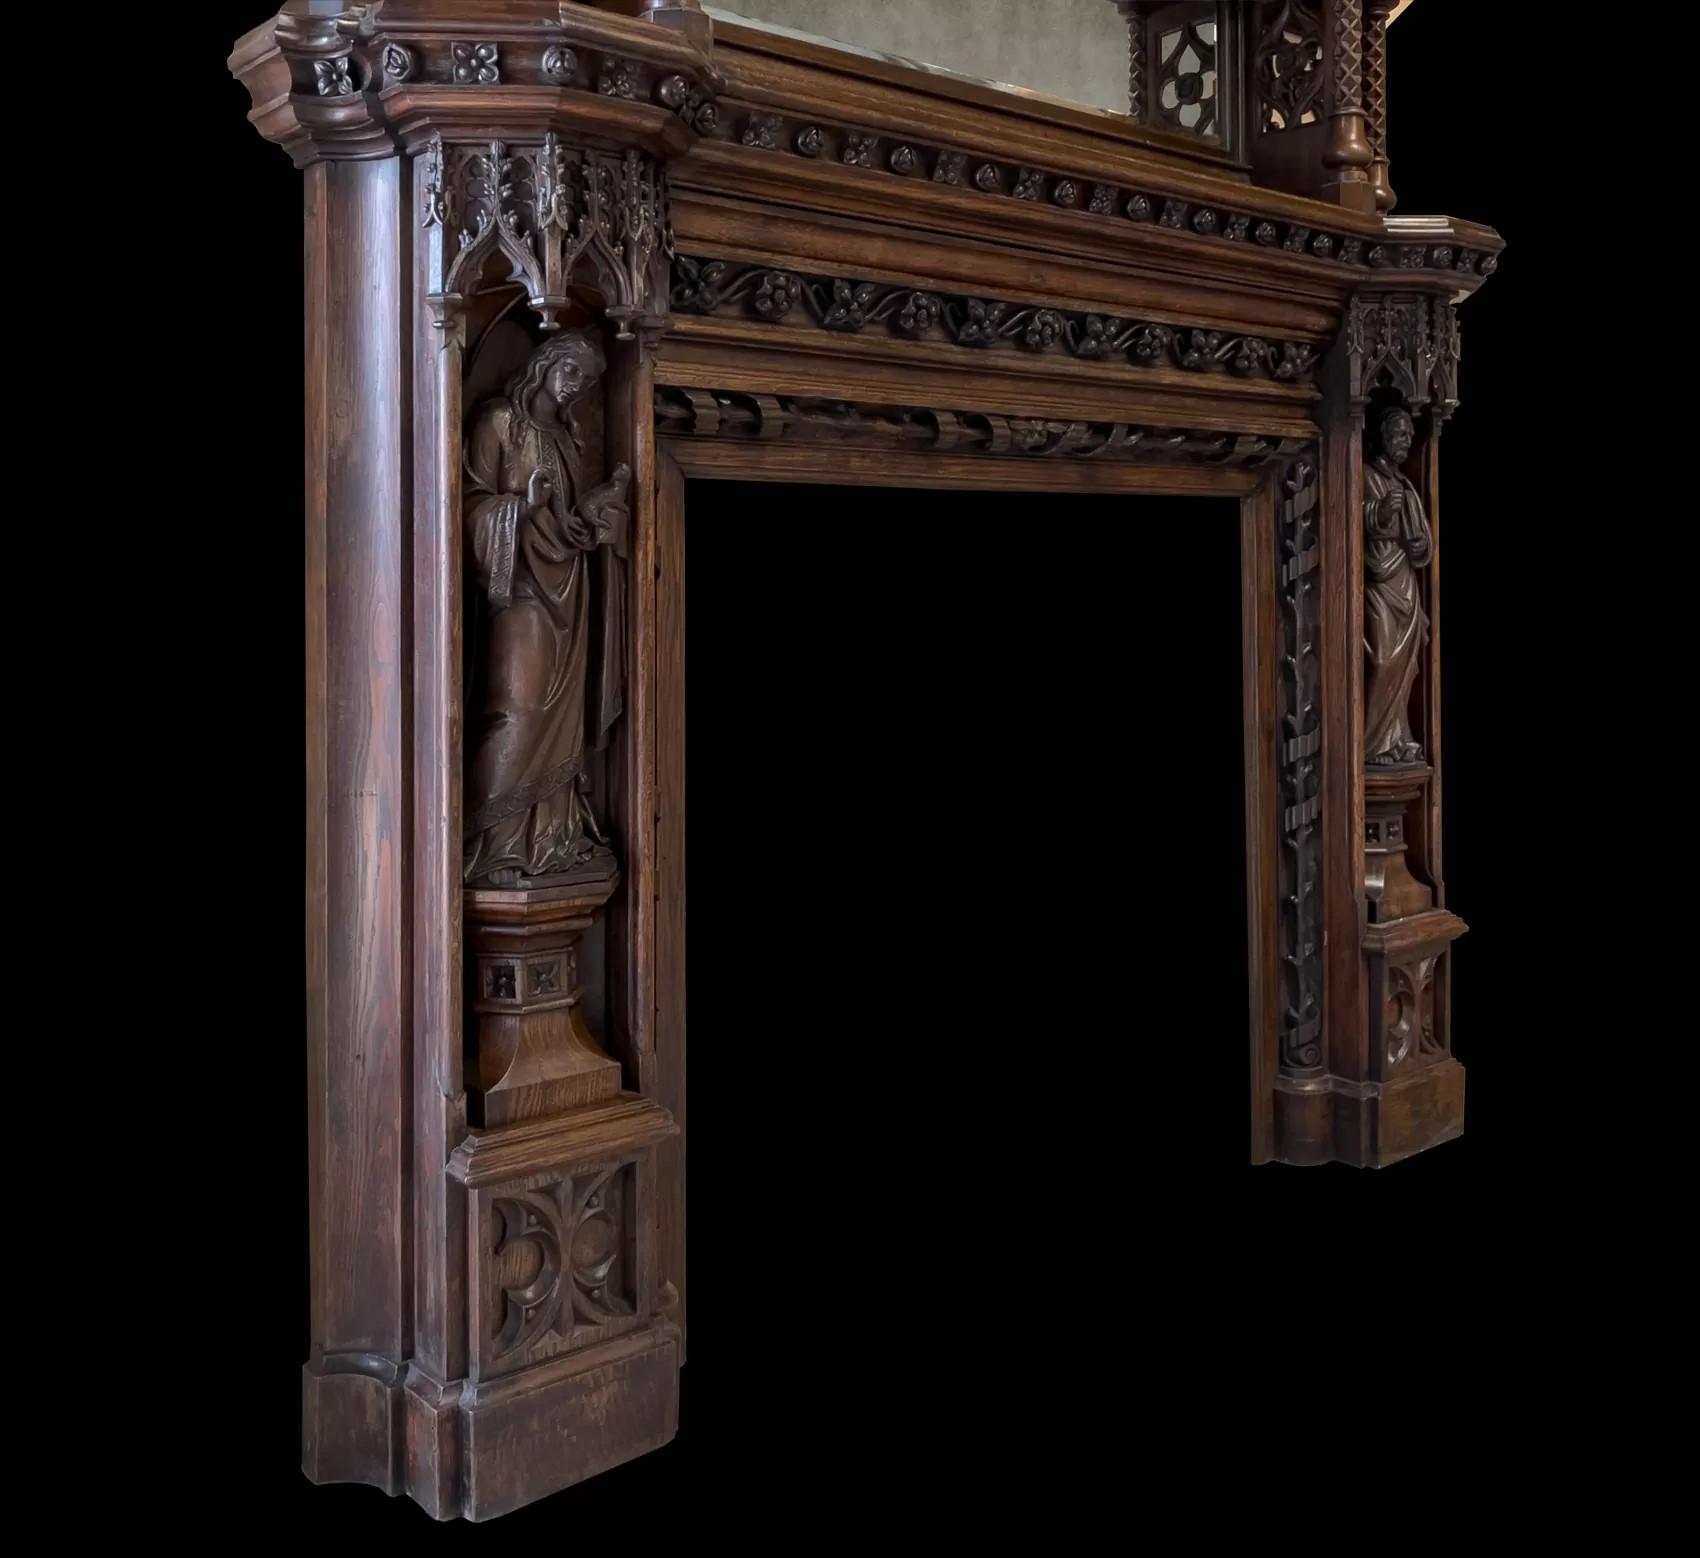 19th Century A magnificent antique English 19th century Gothic Revival carved oak mantel For Sale